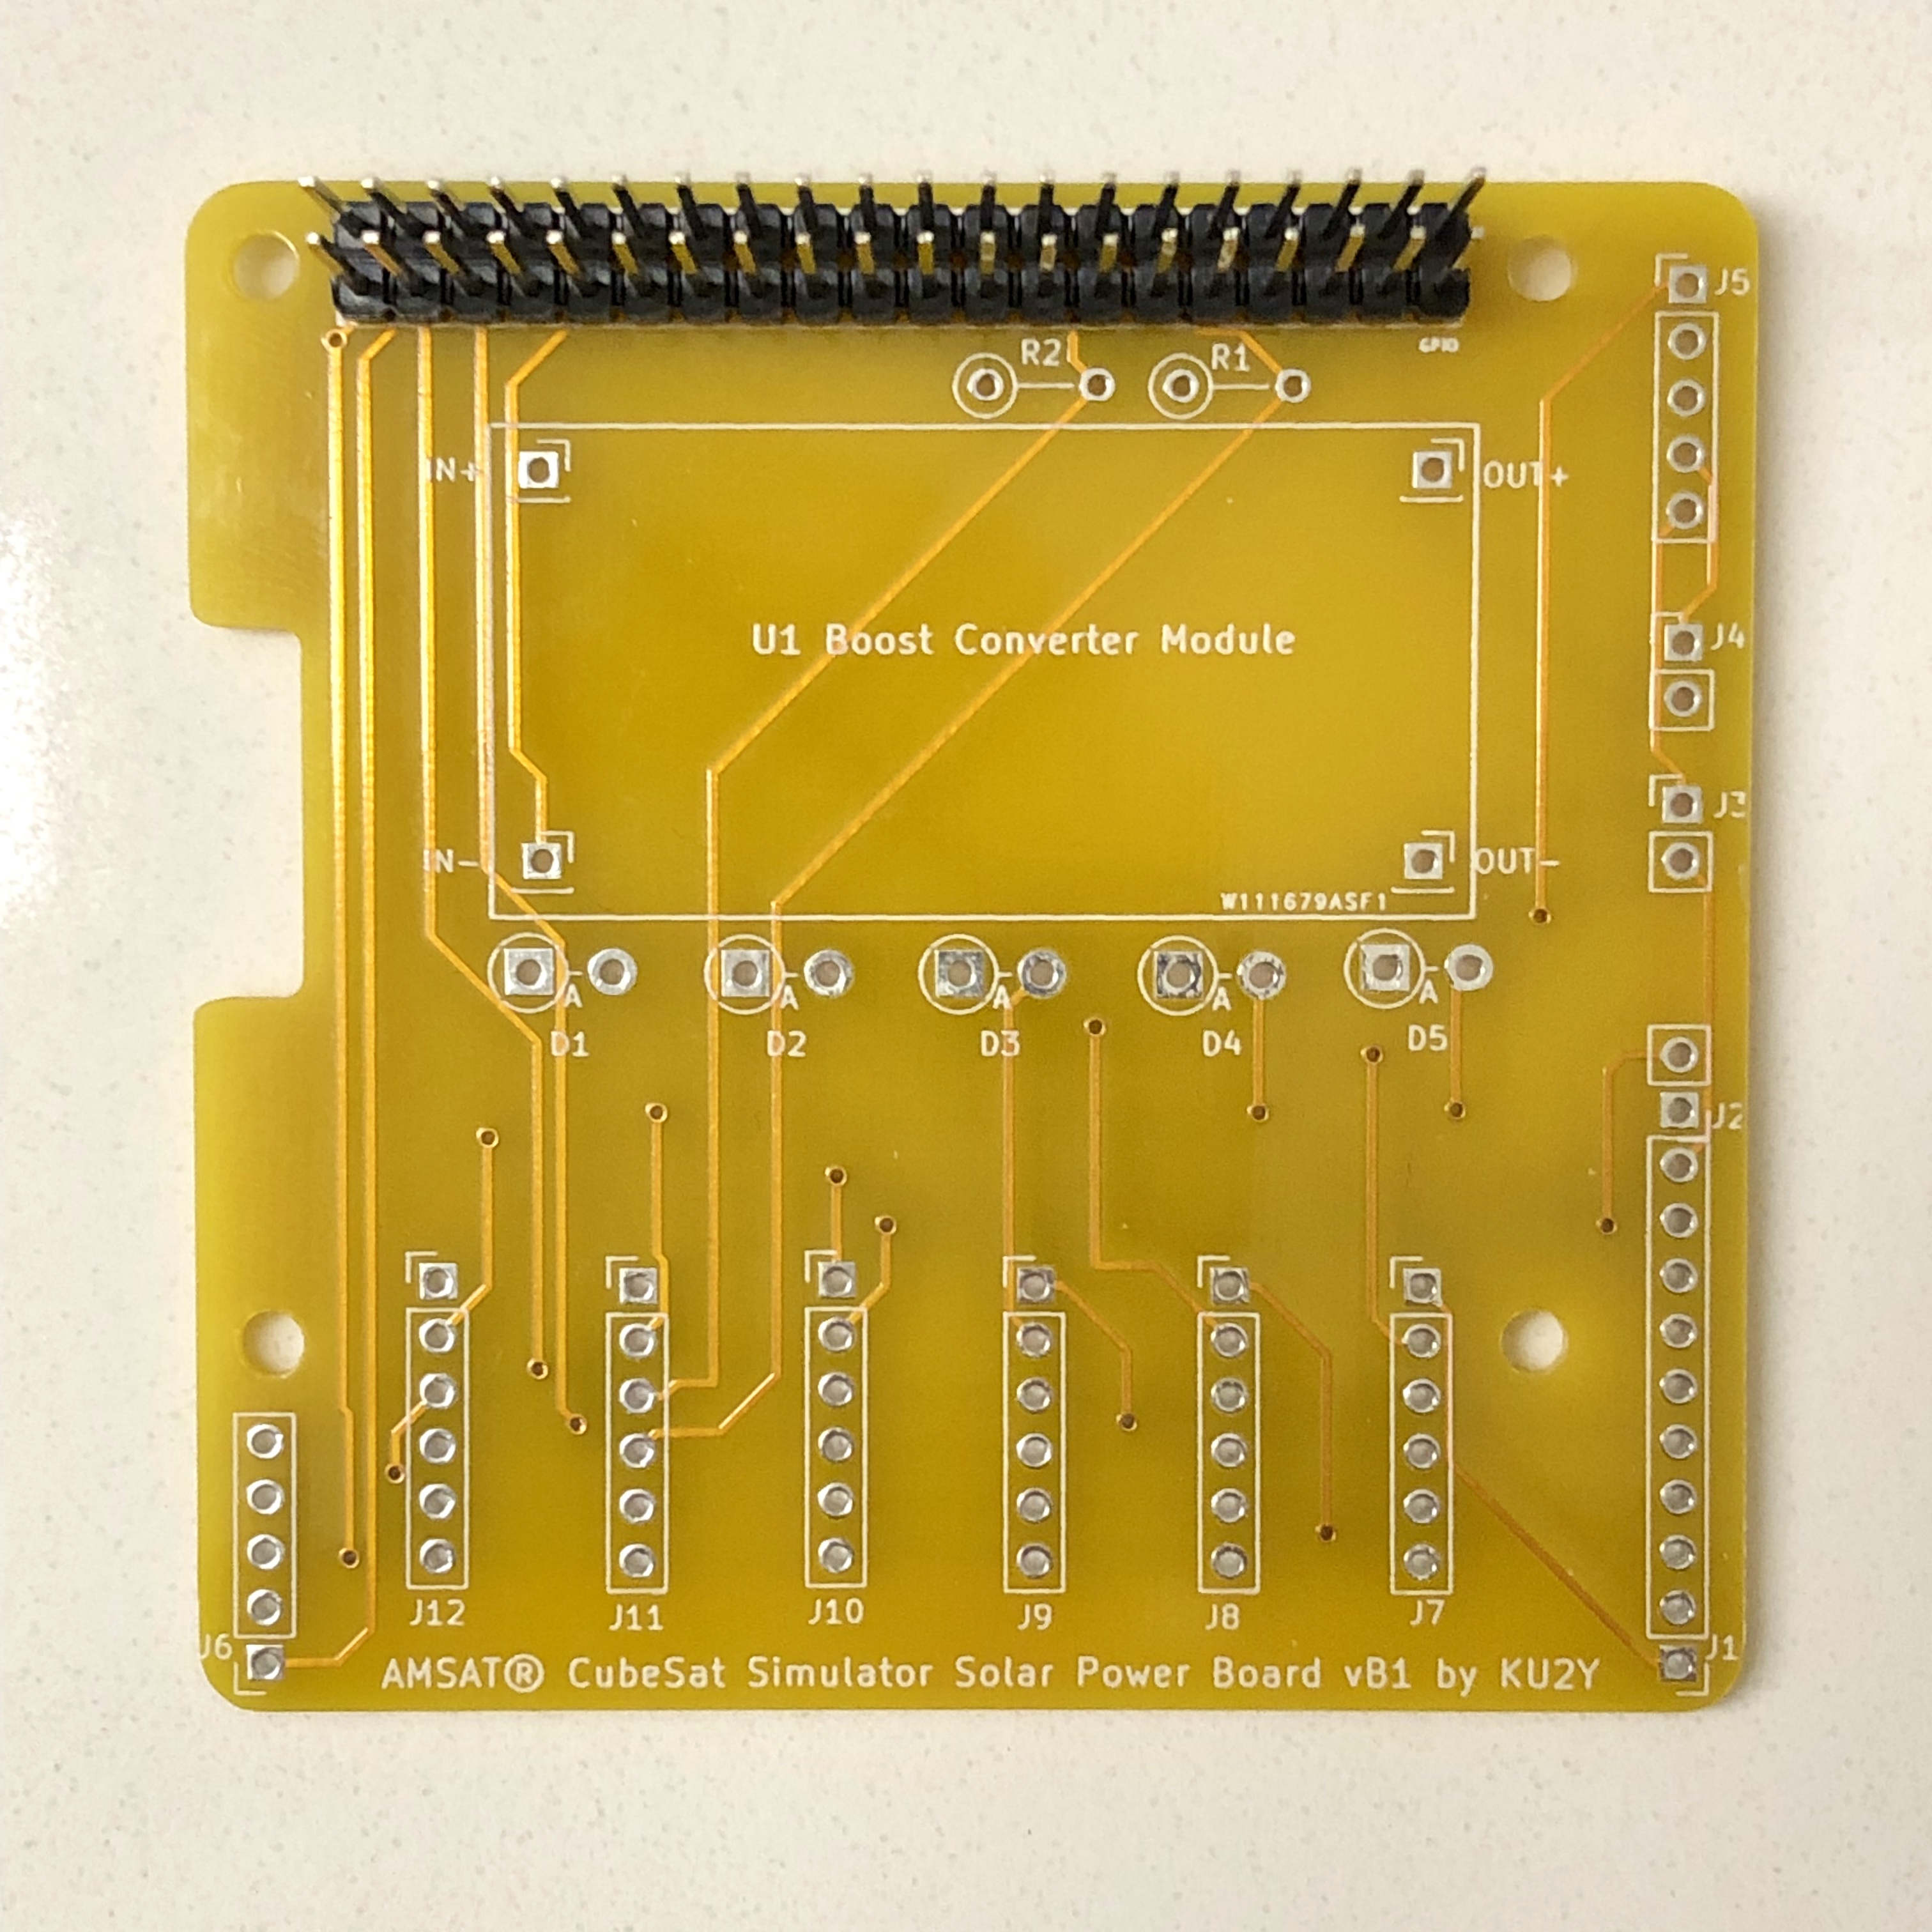 PCB with GPIO header installed